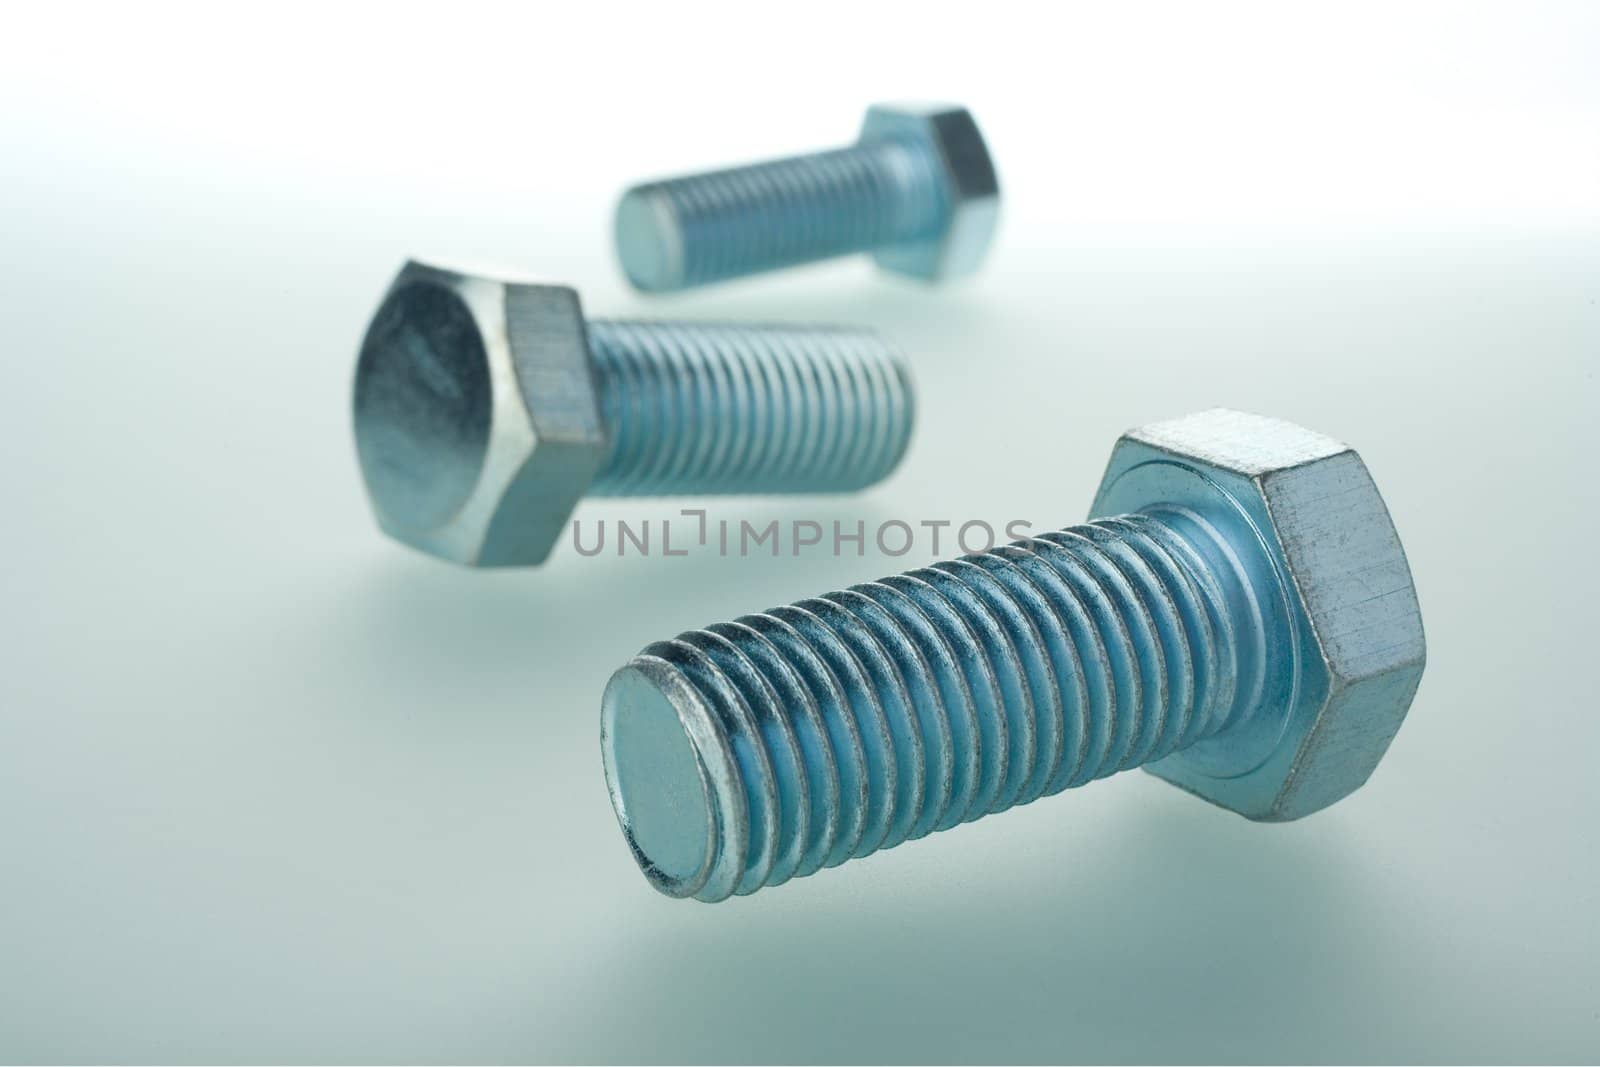 brilliant bolts of various sizes on a white background